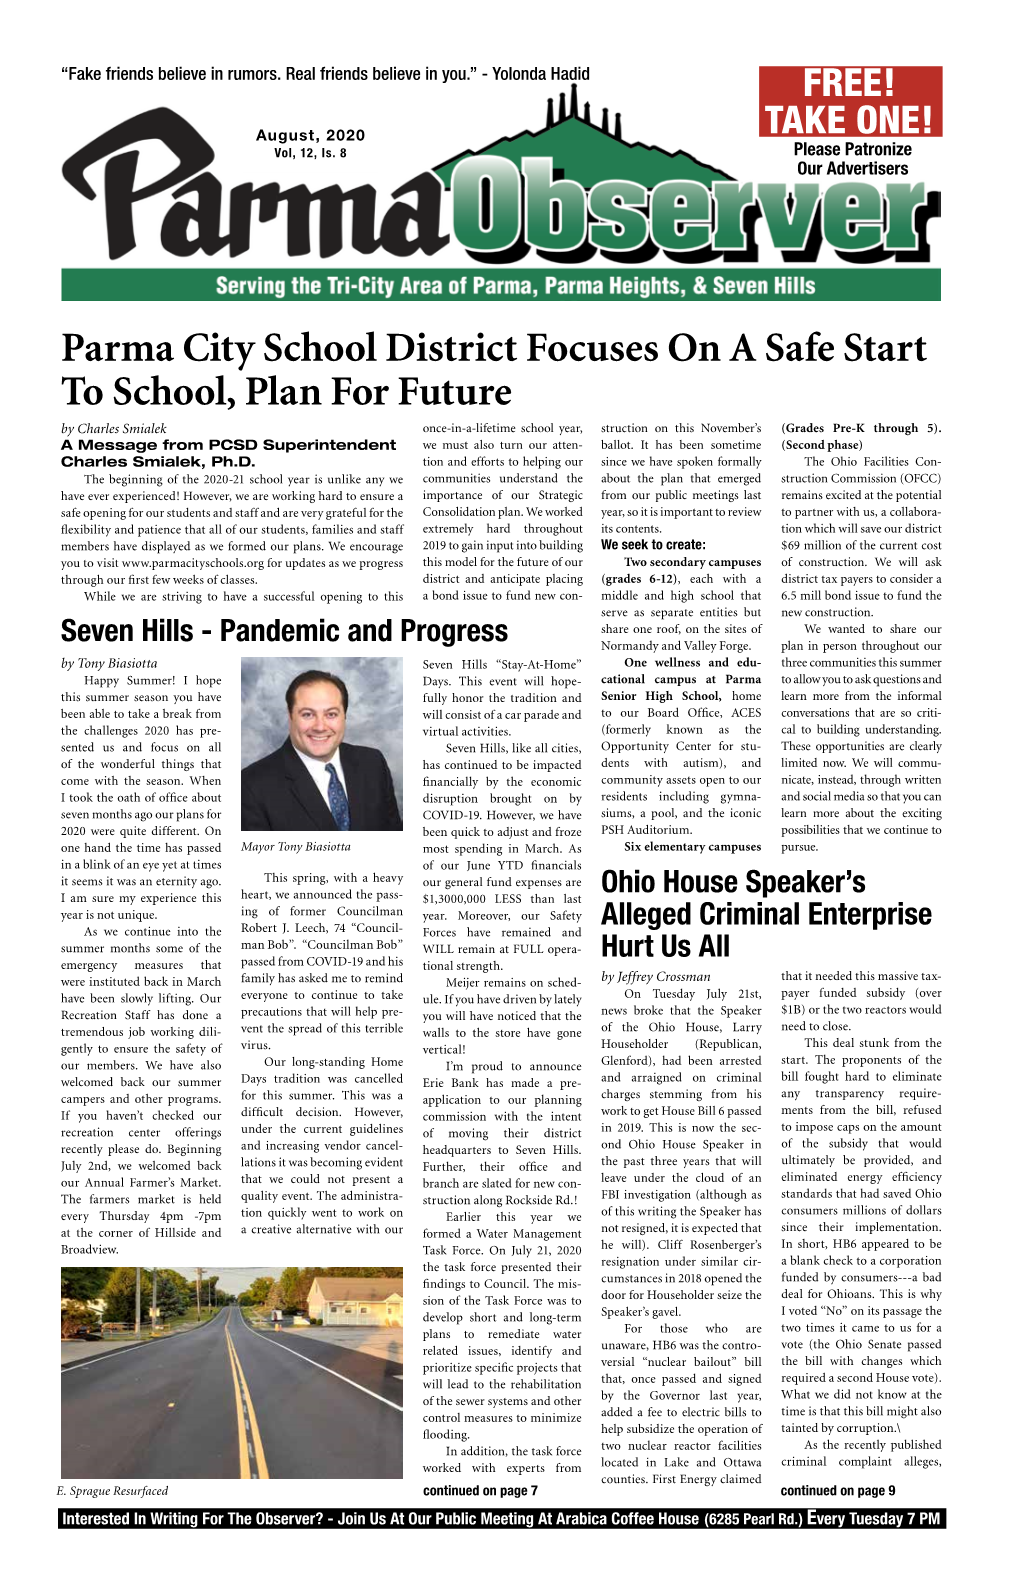 Parma City School District Focuses on a Safe Start to School, Plan for Future